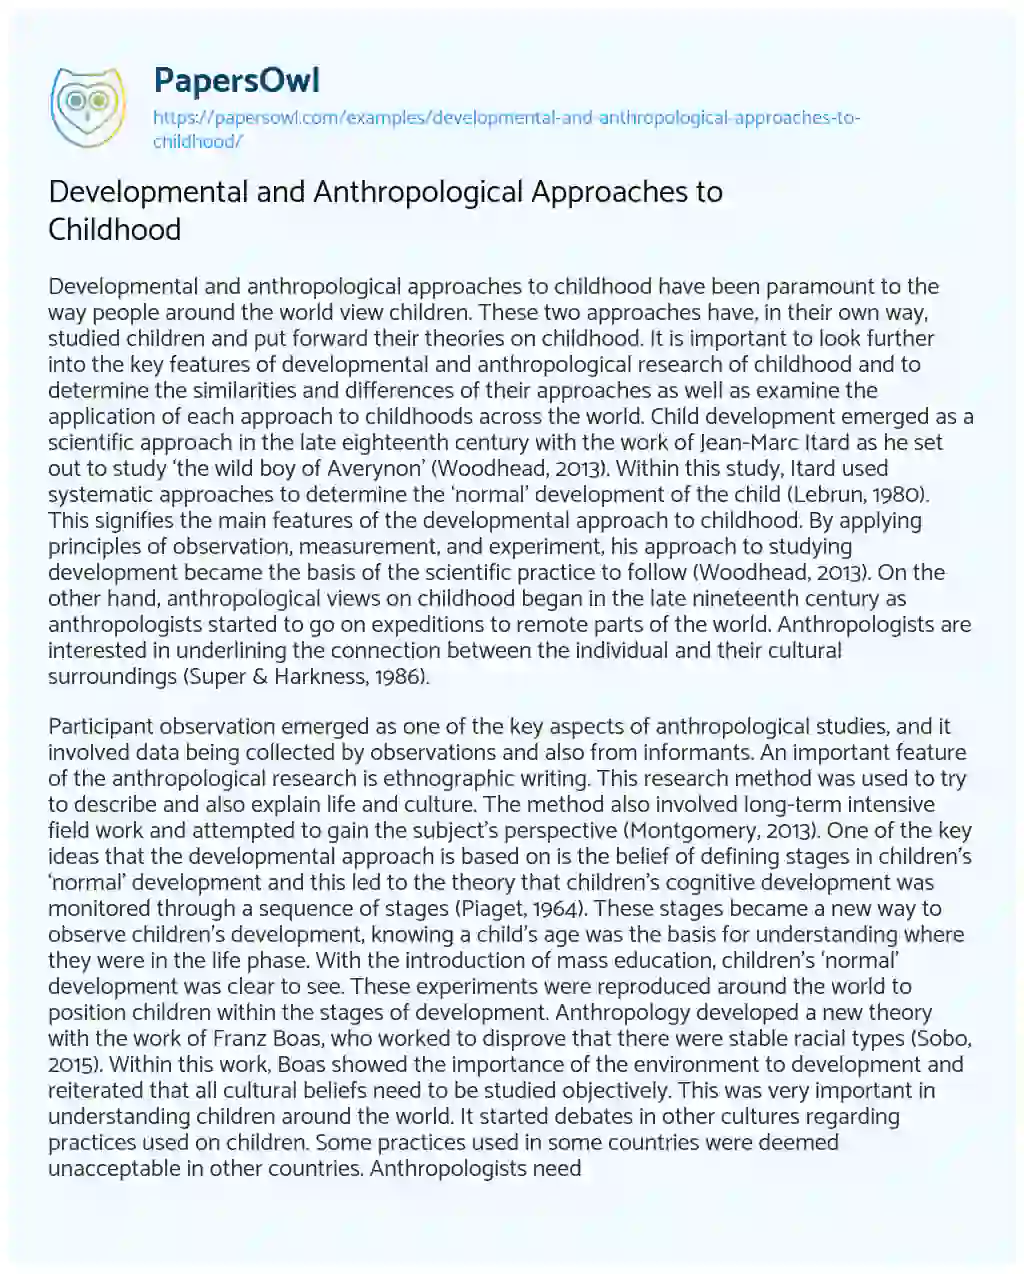 Essay on Developmental and Anthropological Approaches to Childhood